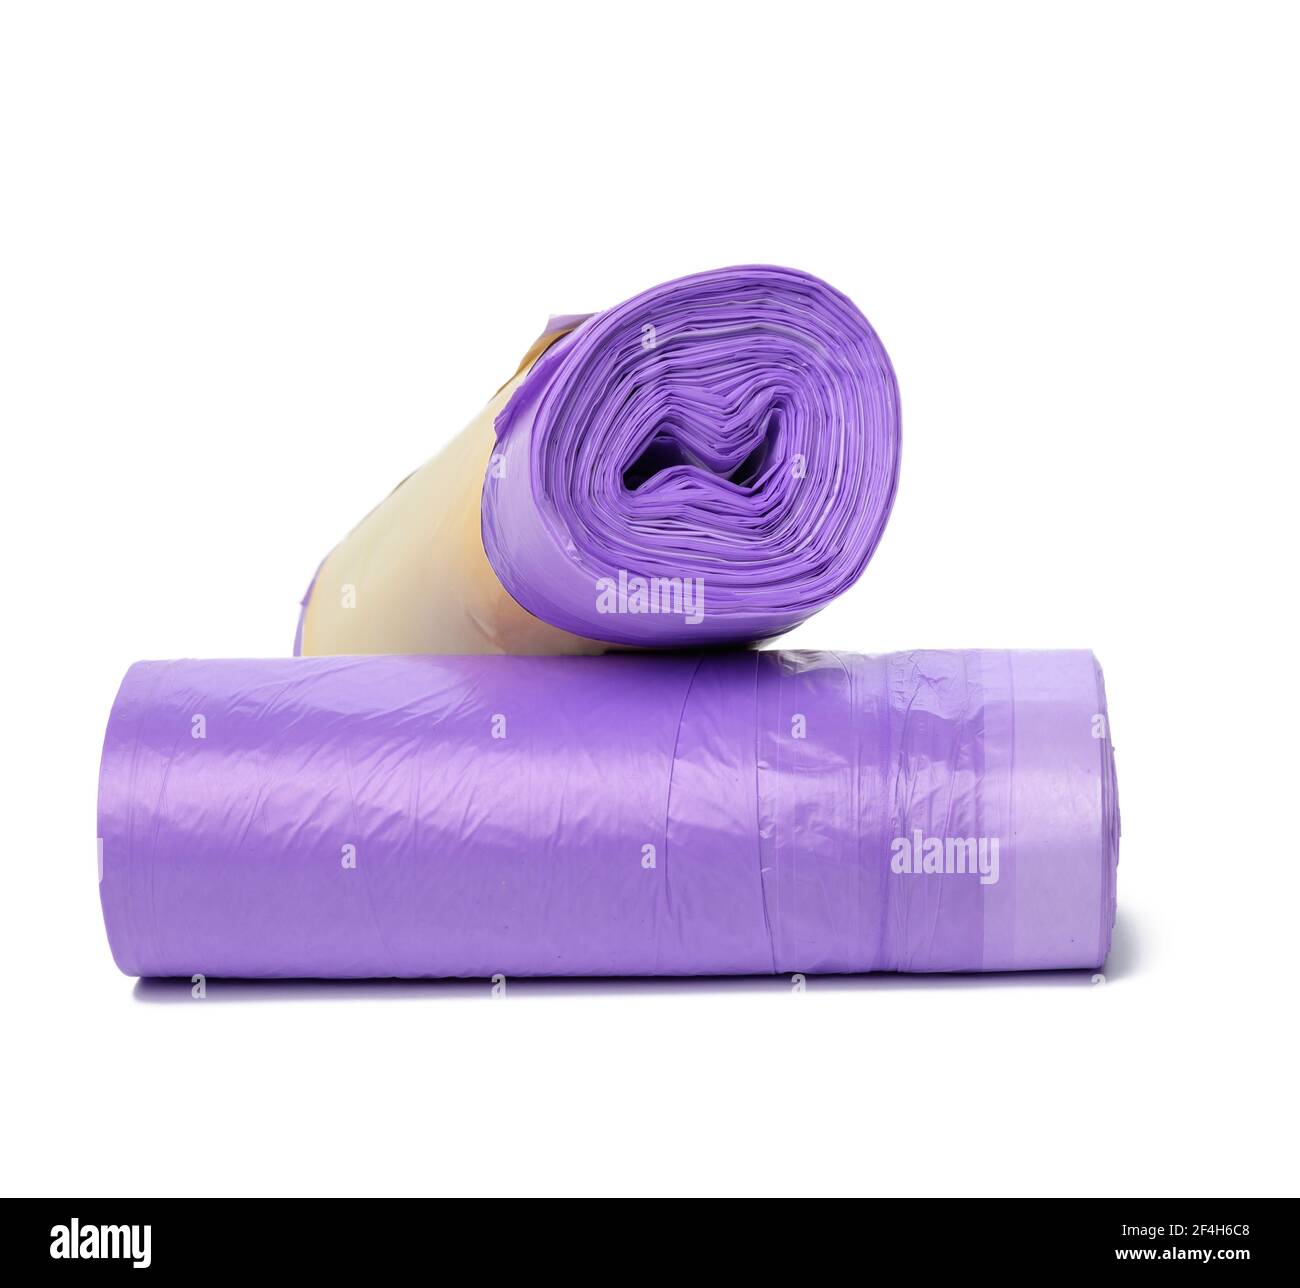 https://c8.alamy.com/comp/2F4H6C8/skein-of-purple-plastic-trash-bags-with-strings-isolated-on-white-background-close-up-2F4H6C8.jpg